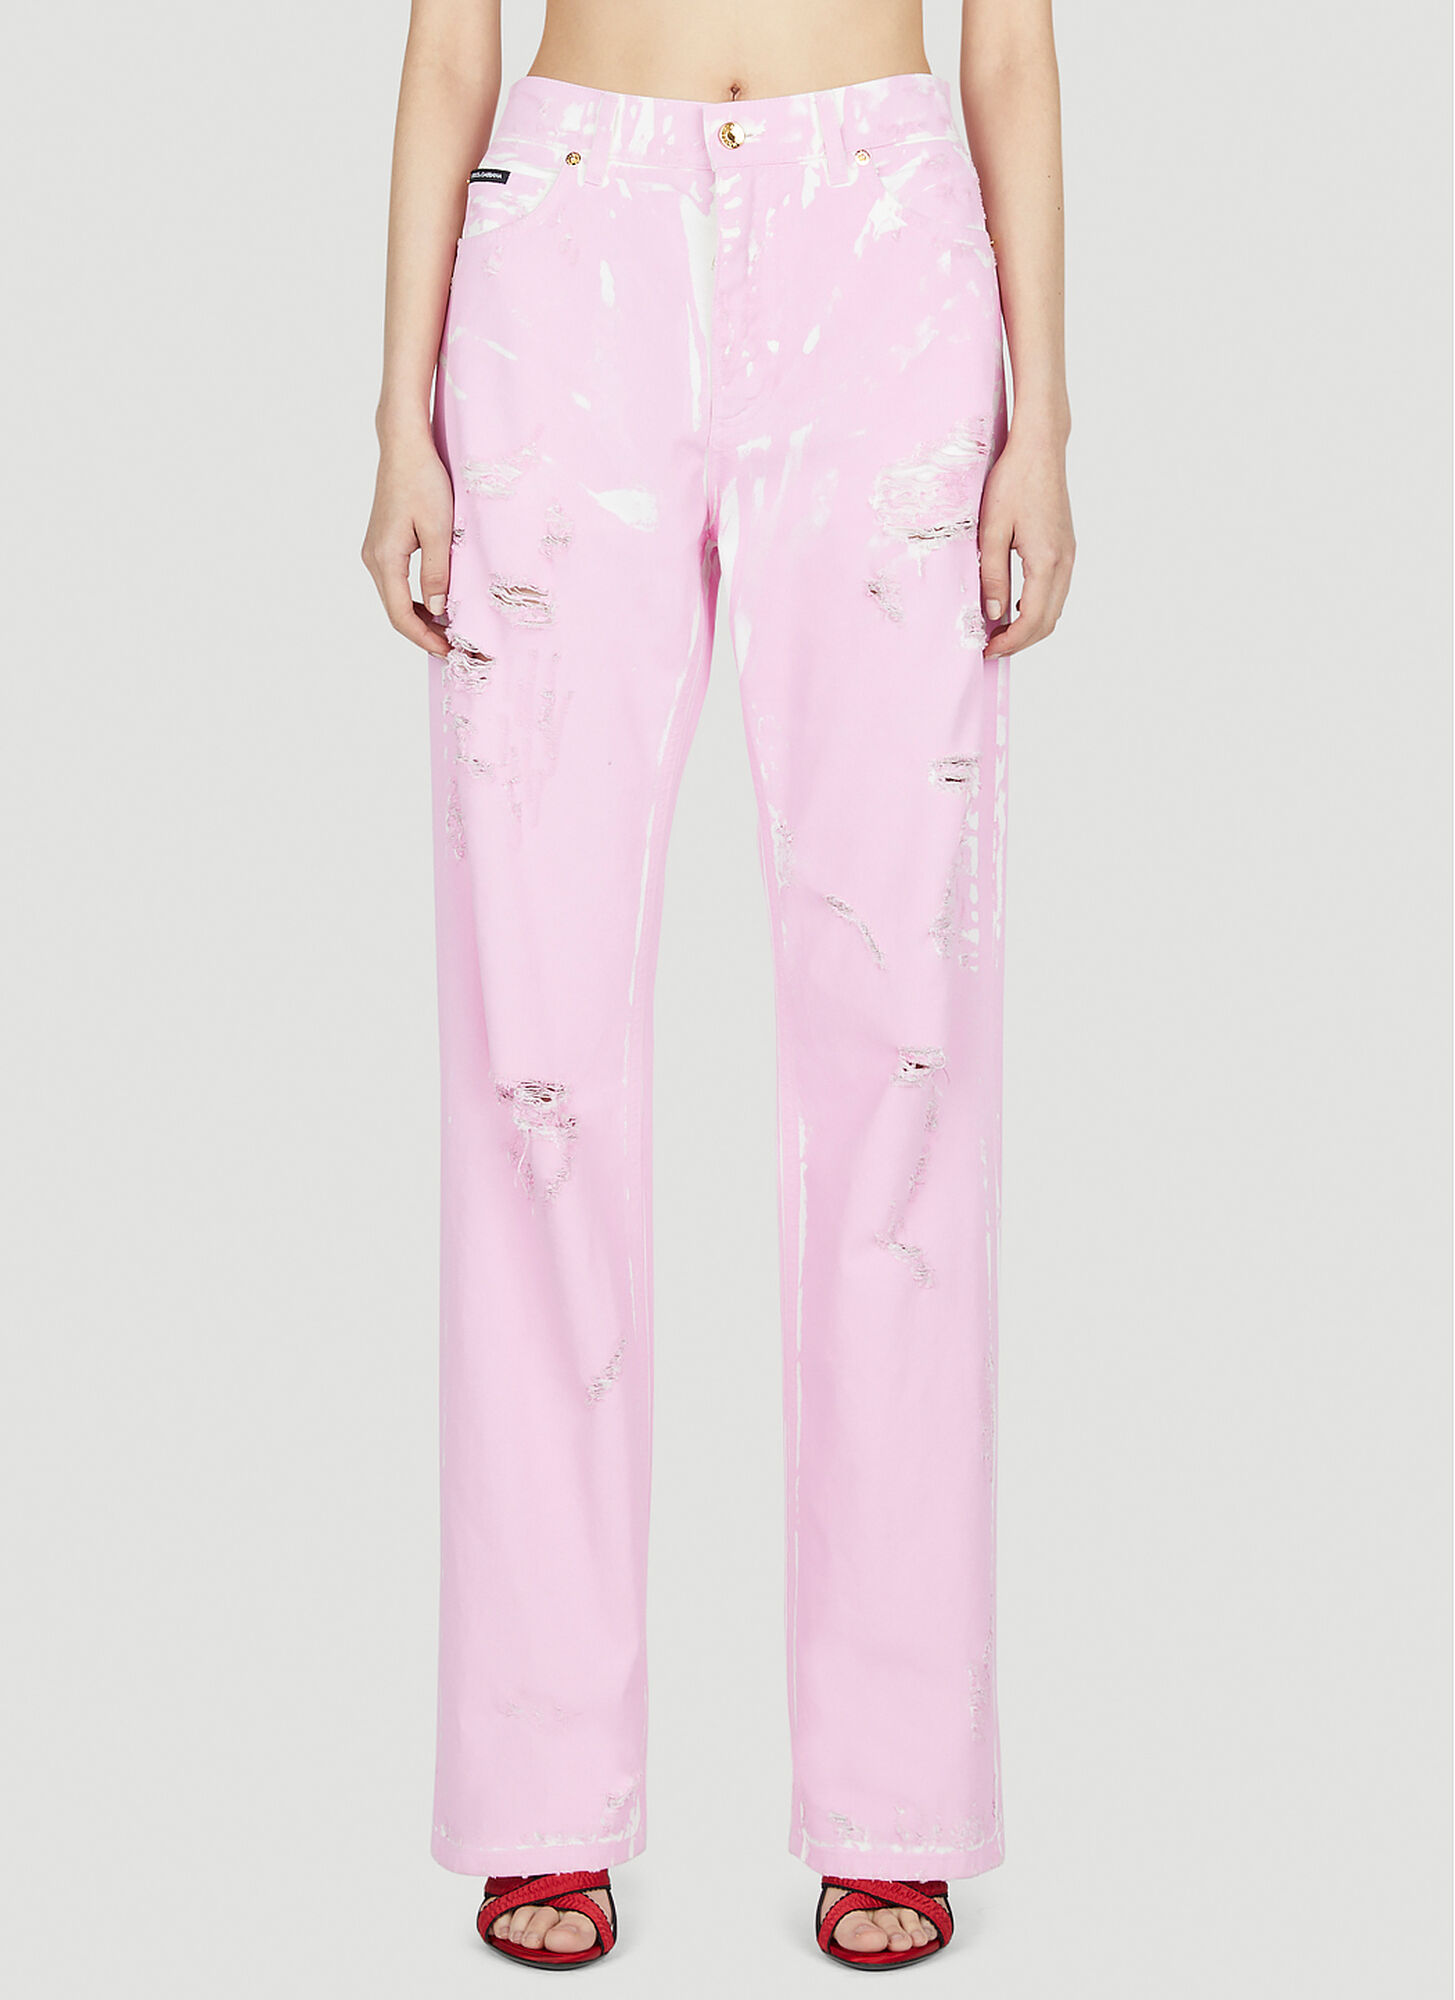 Dolce & Gabbana Distressed Painted Trousers